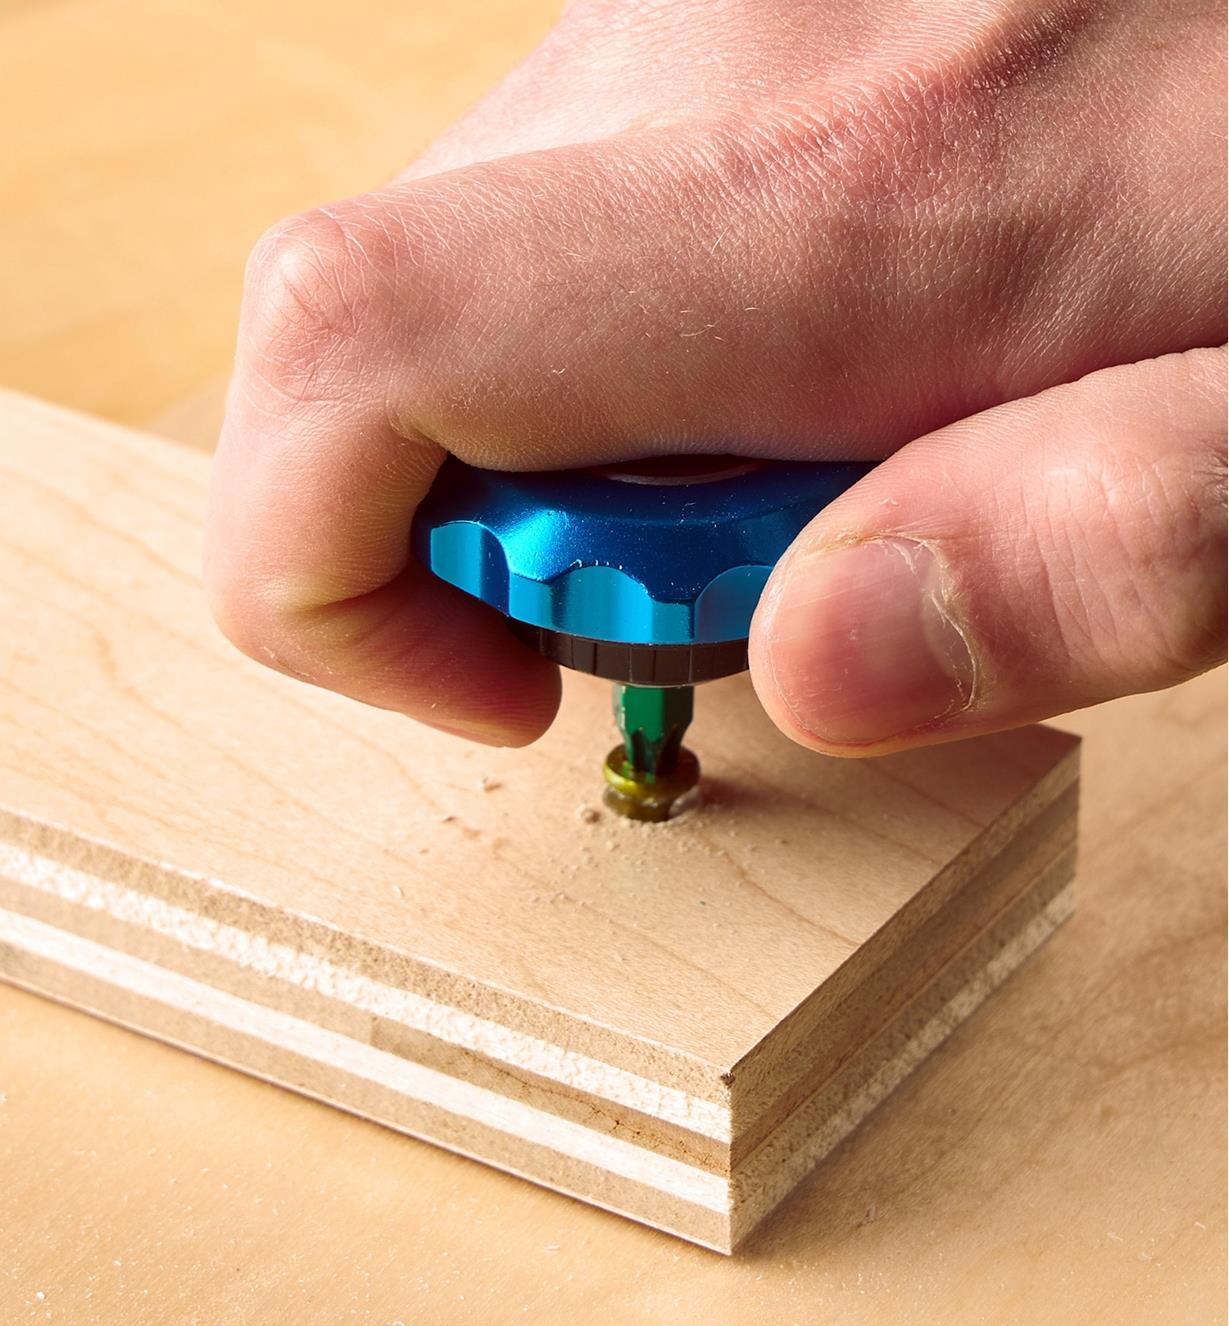 A palm driver being used to drive a screw into a board